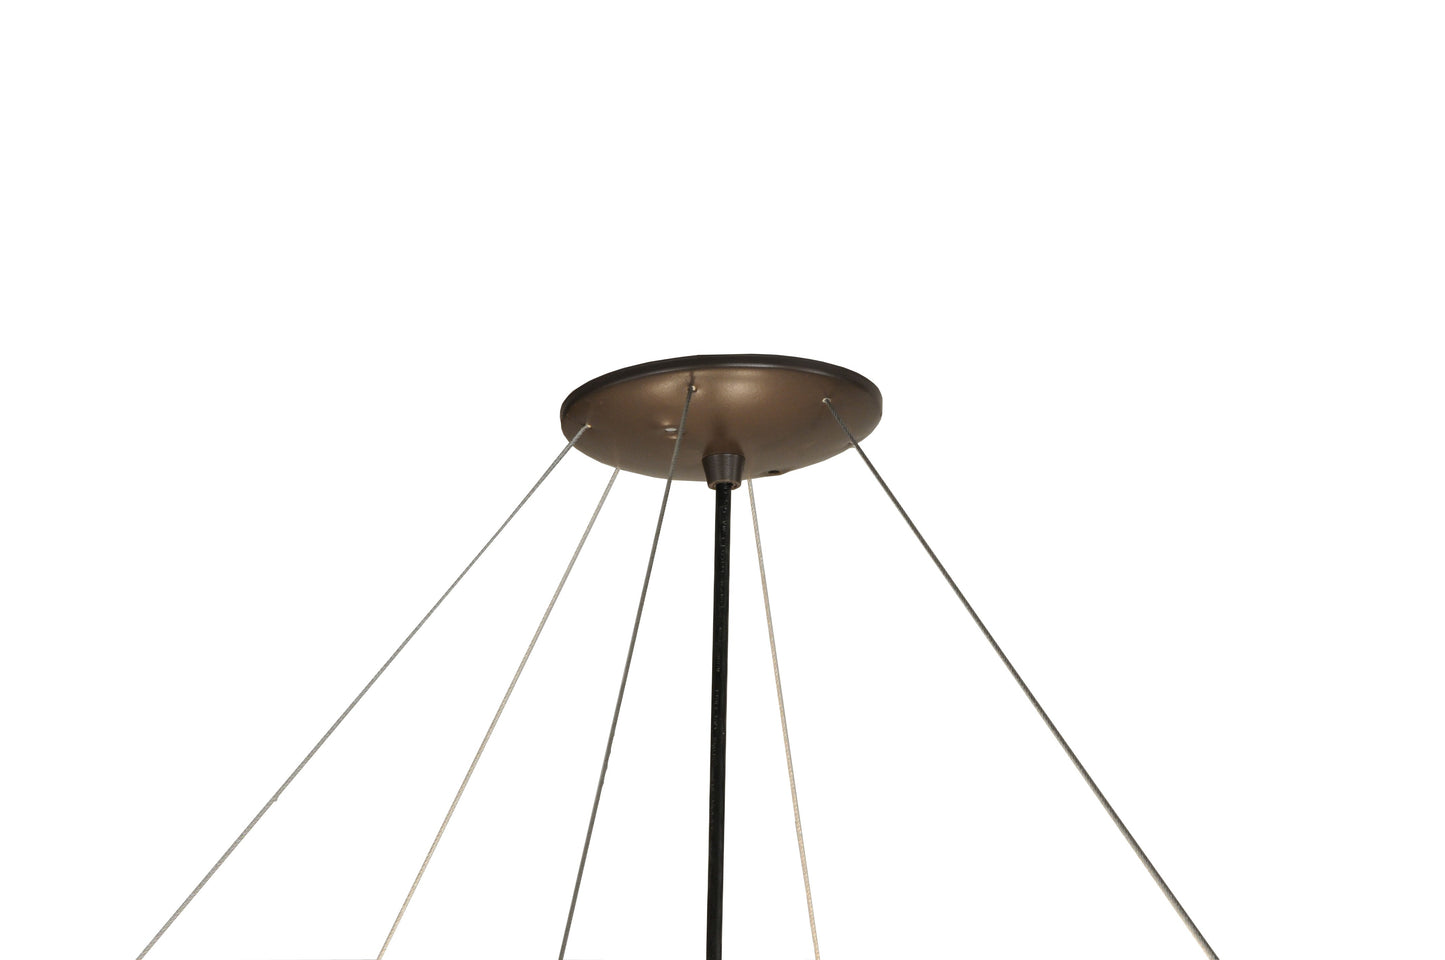 30" Cypola Inverted Pendant by 2nd Ave Lighting